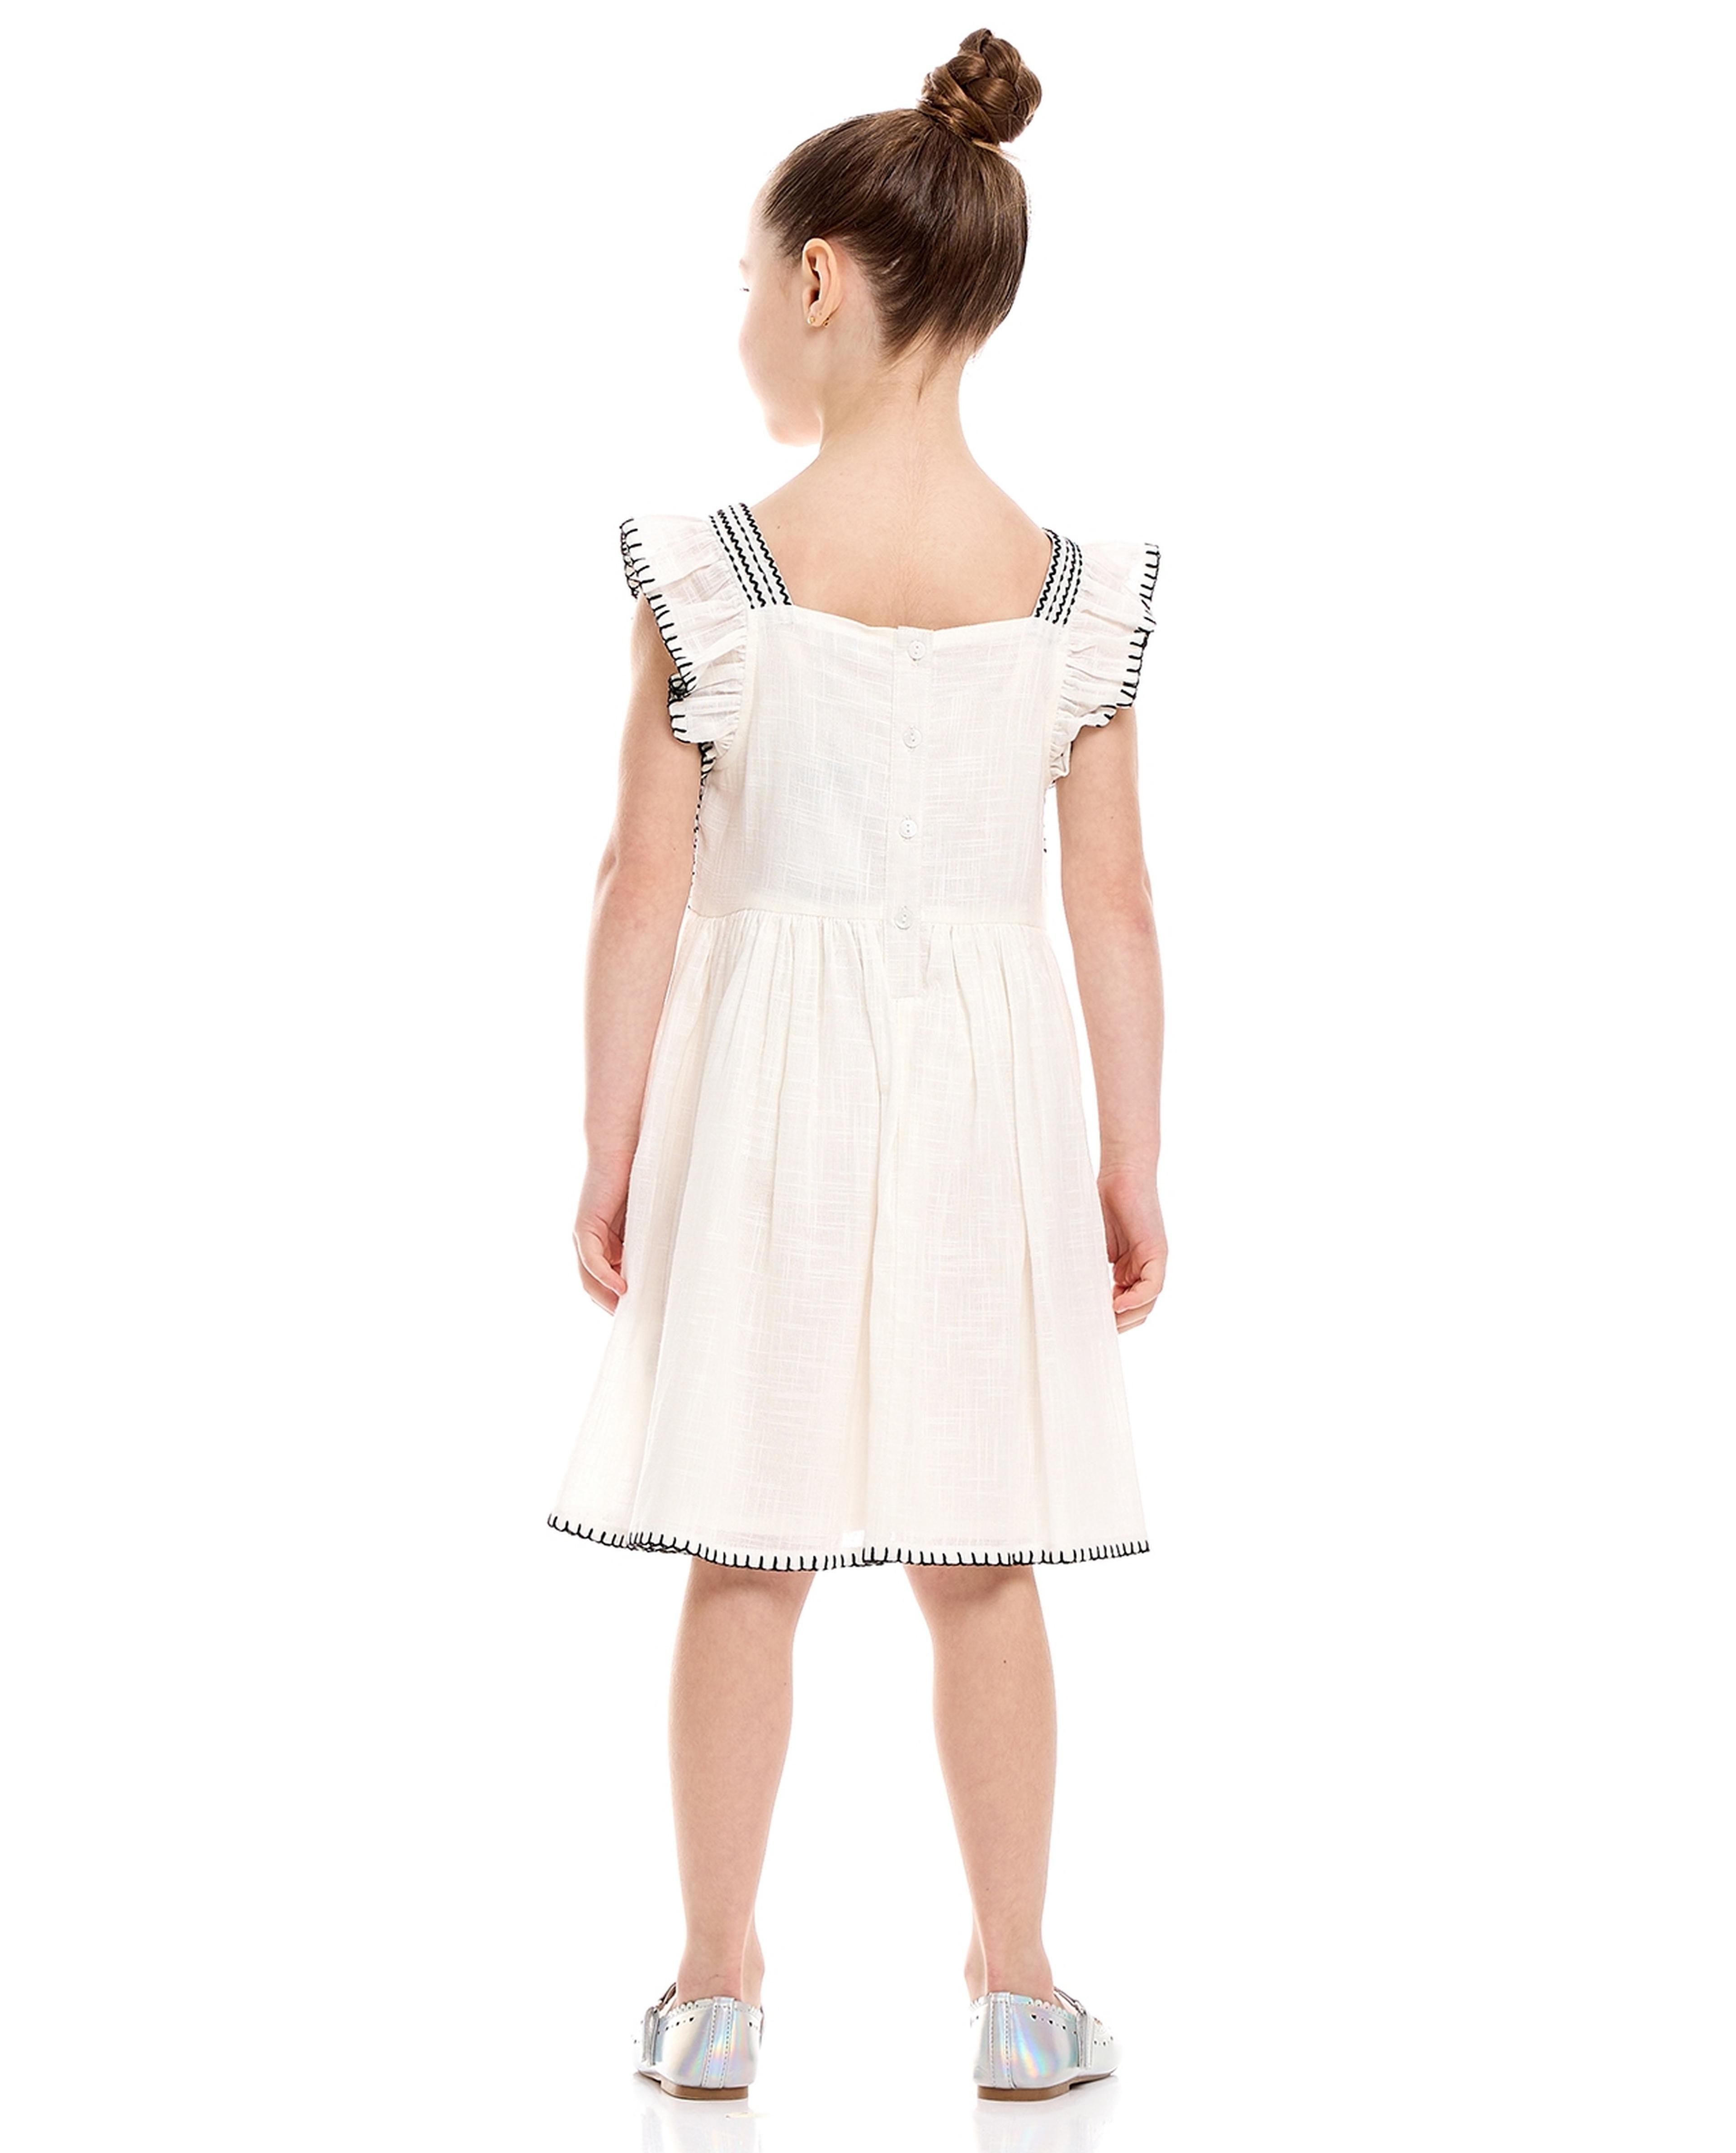 Embroidered Fit and Flare Dress with Square Neck and Flutter Sleeves